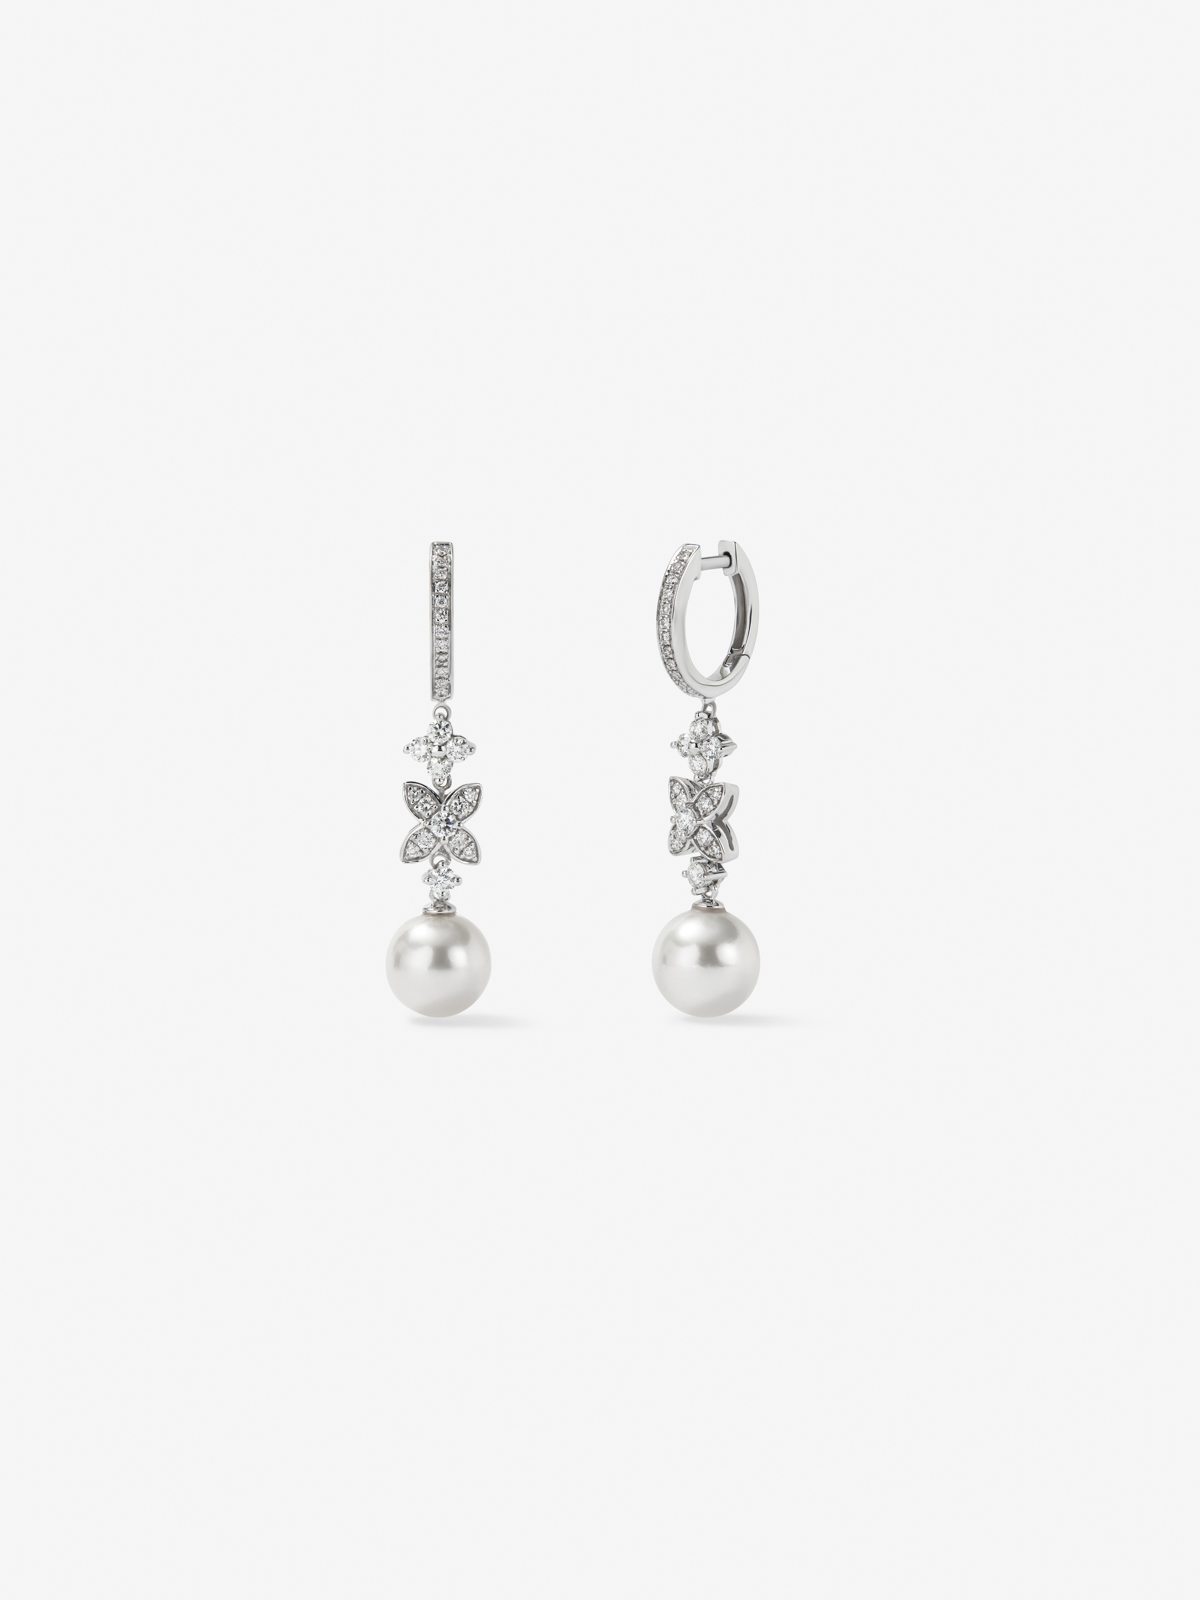 18K White Gold Earrings With Bright Size of 0.76 CTS and 8.5 mm pearls